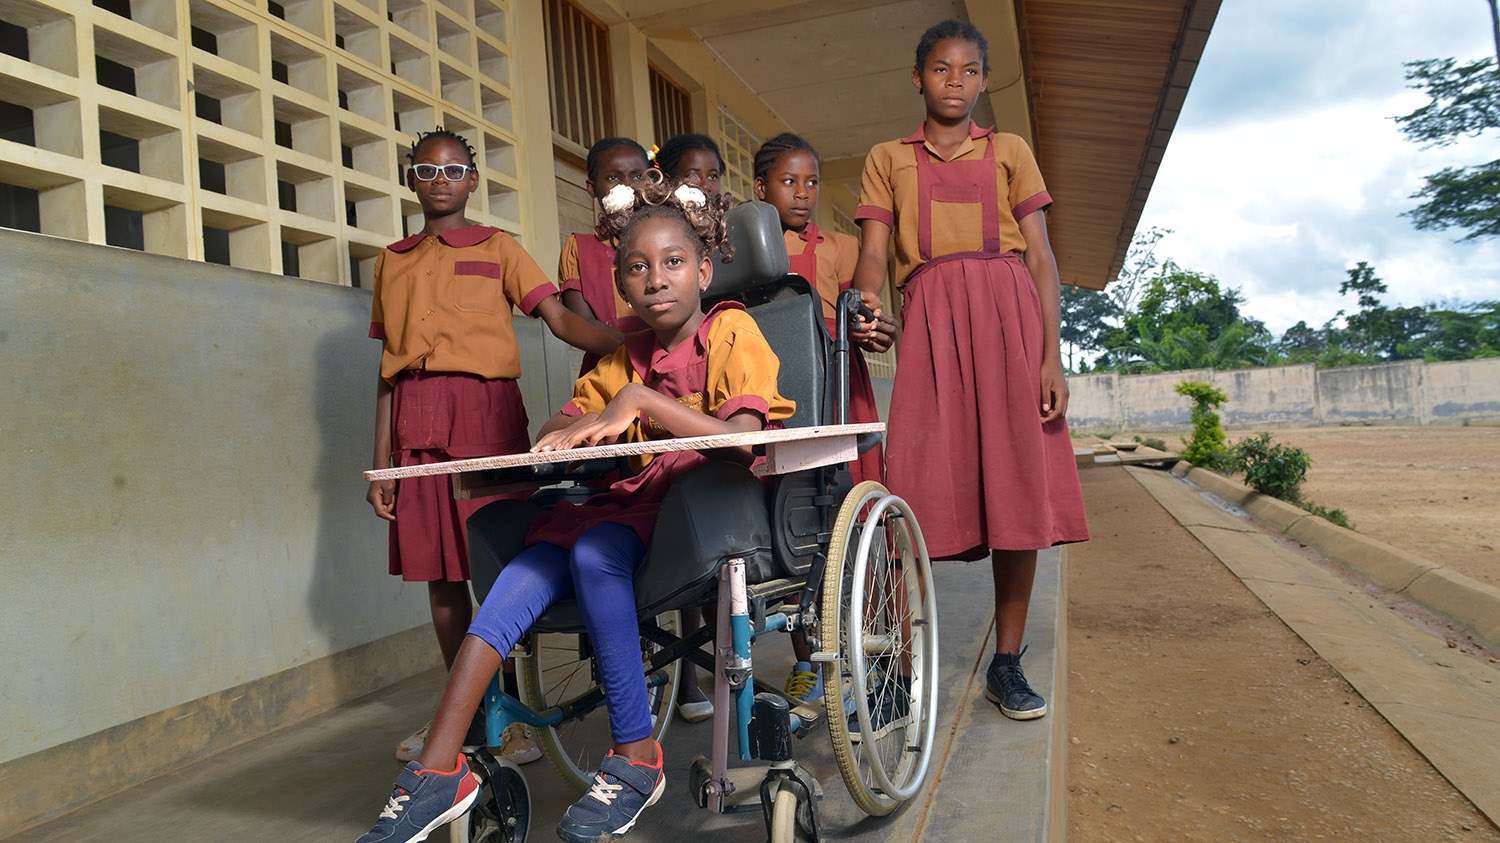 Lesline, who uses a wheelchair, outside classroom with other pupils.